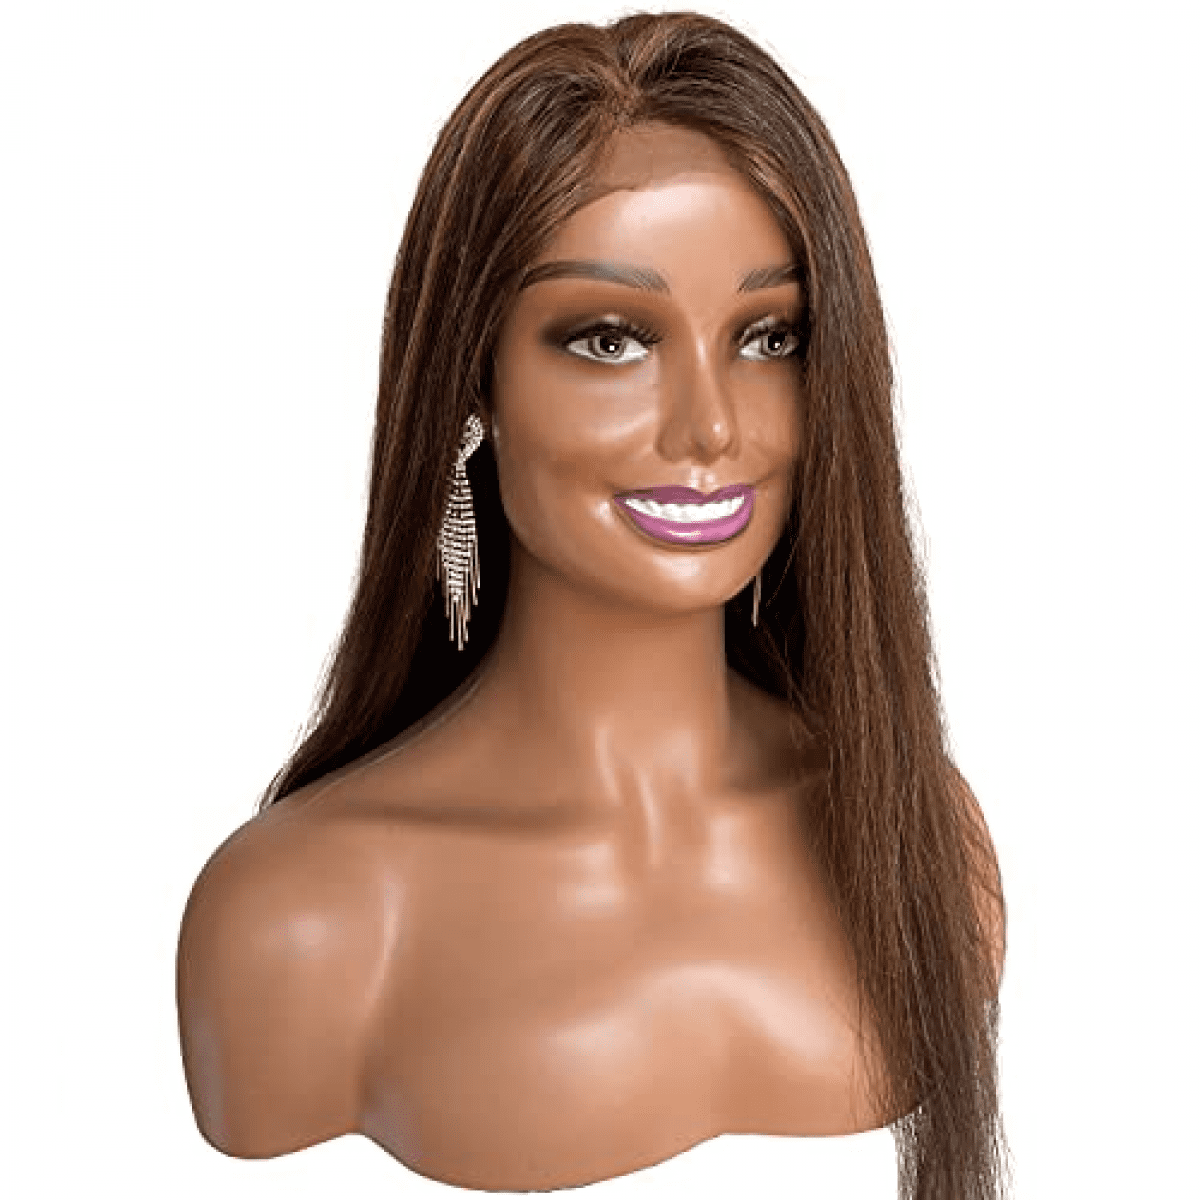 Female Mannequin Head with Shoulders, Realistic Style